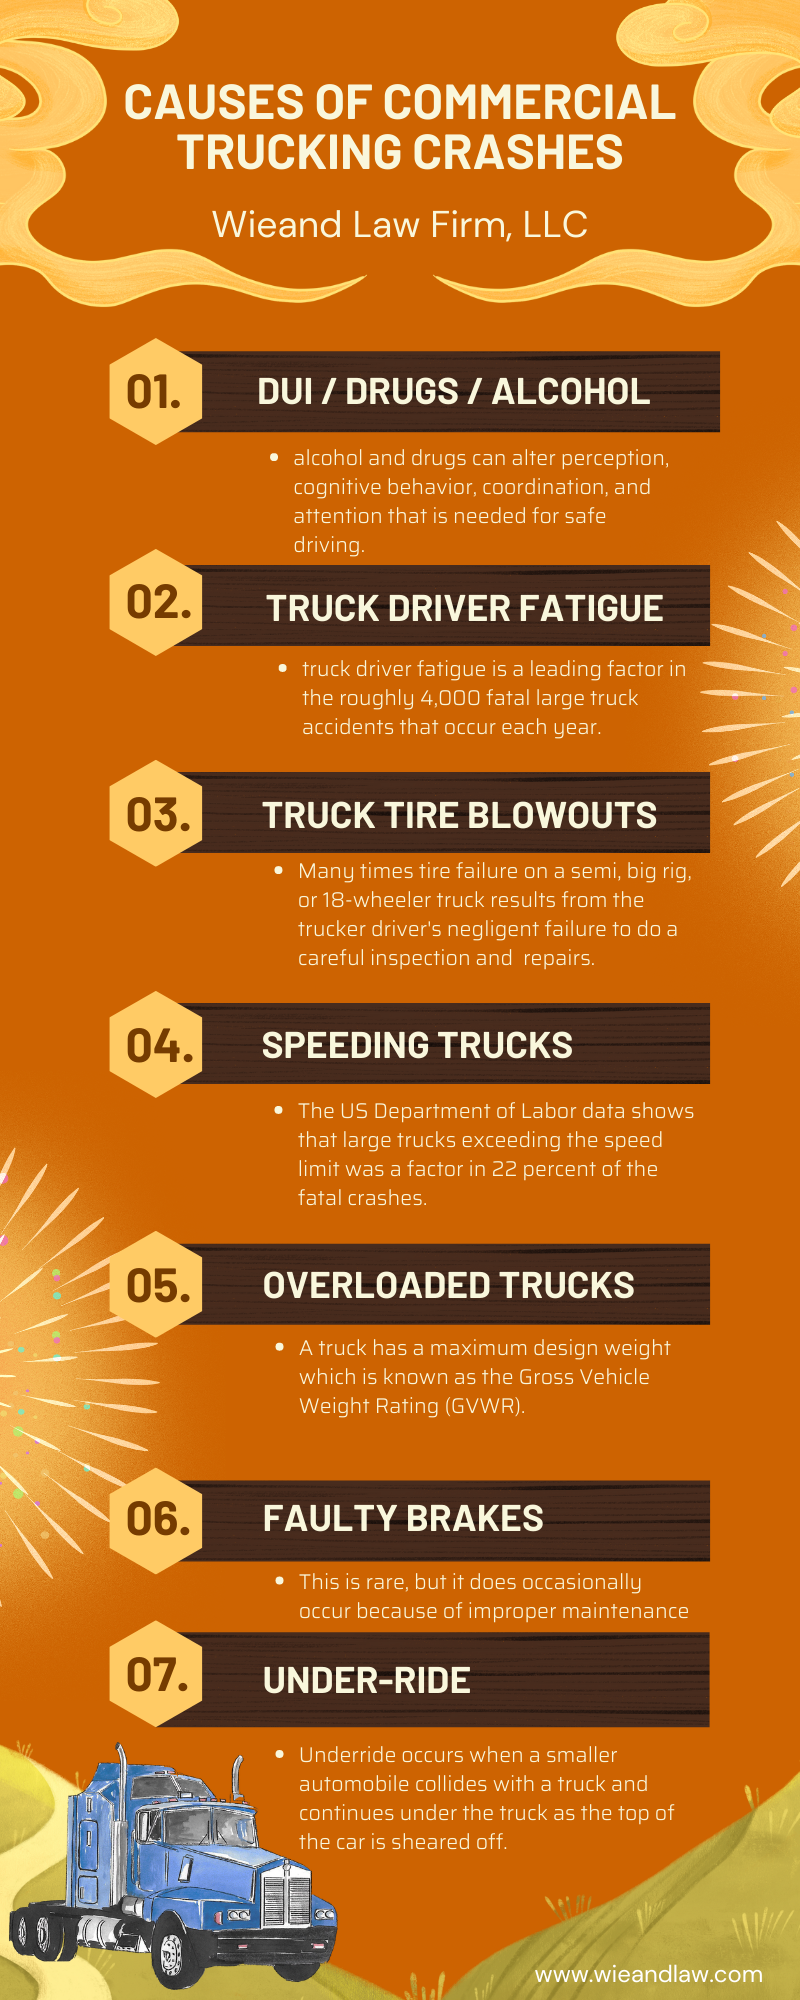 Causes of Commercial Trucking Crashes Infographic